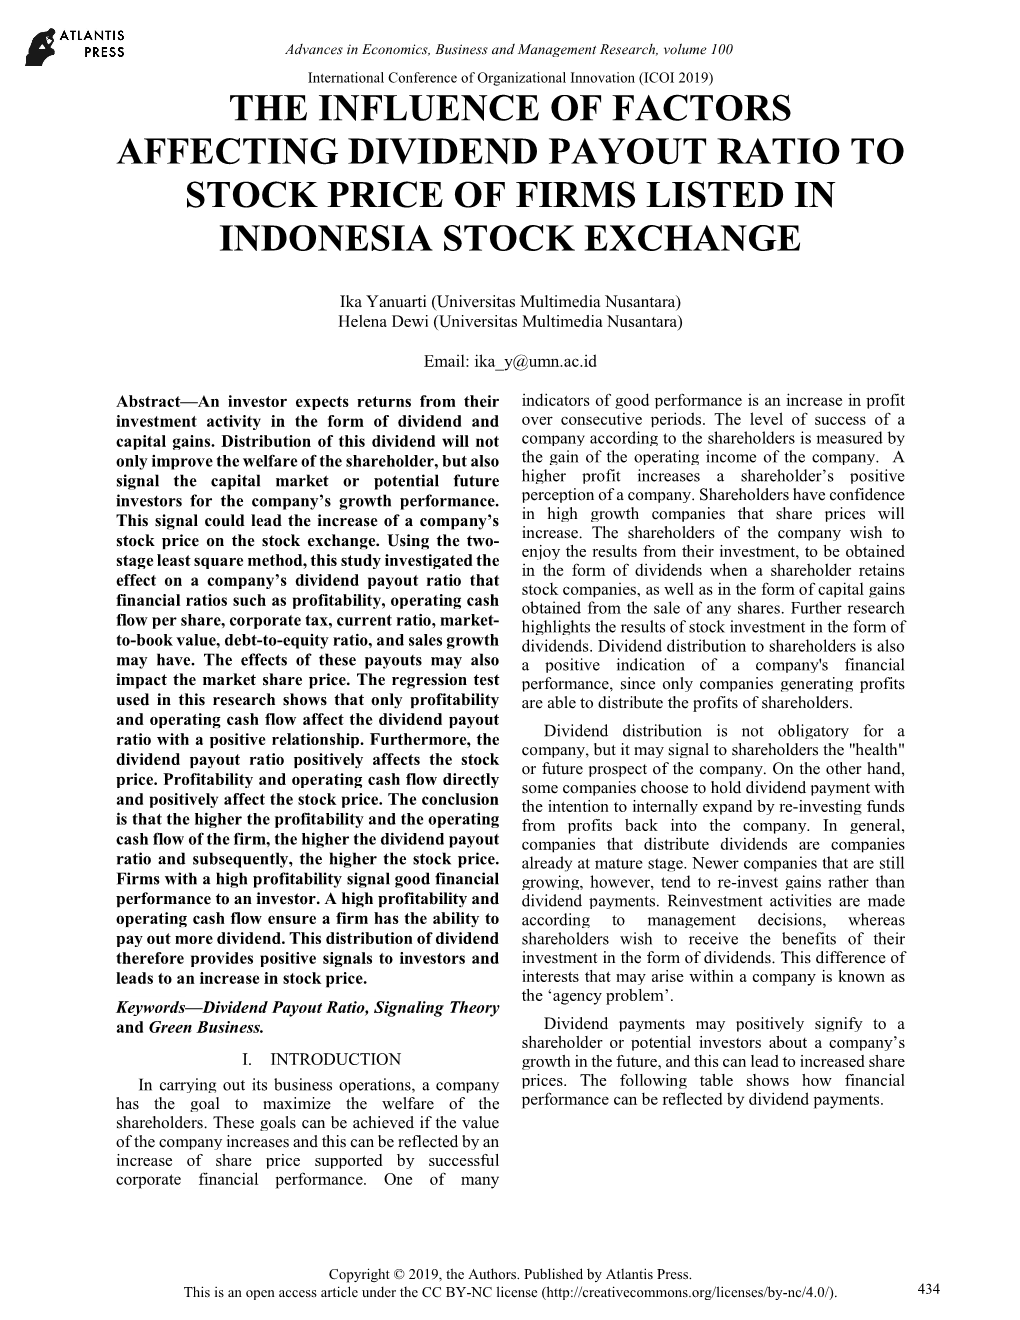 The Influence of Factors Affecting Dividend Payout Ratio to Stock Price of Firms Listed in Indonesia Stock Exchange